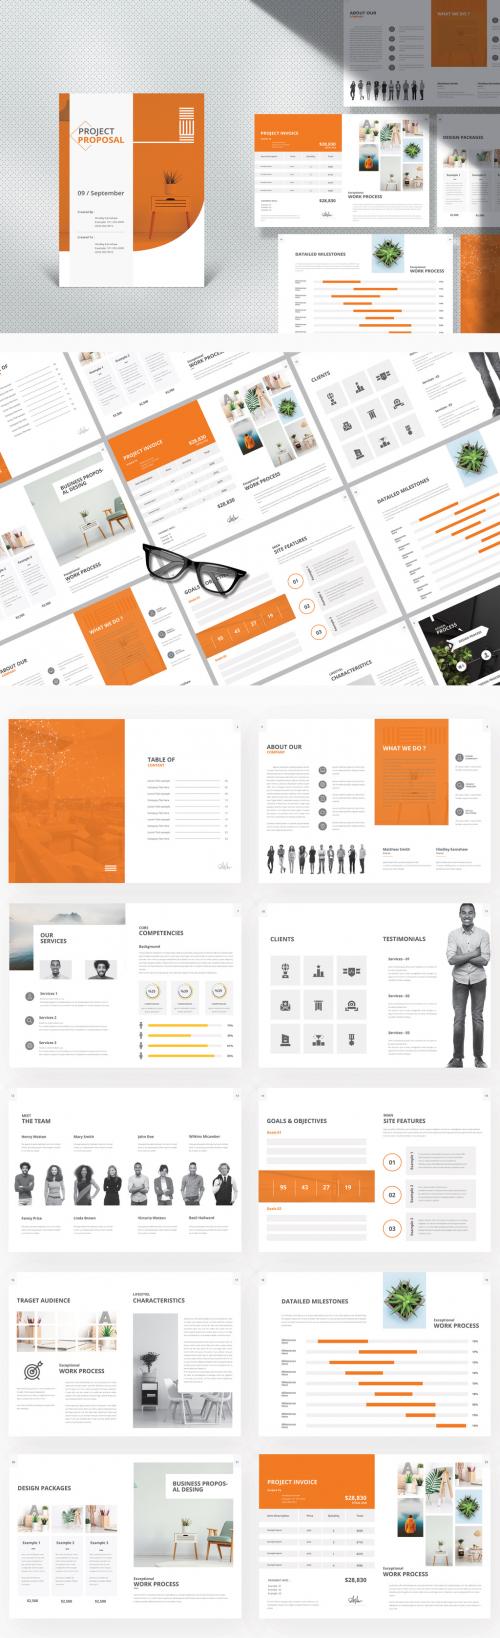 Project Proposal Layout with Orange Accents - 366090314